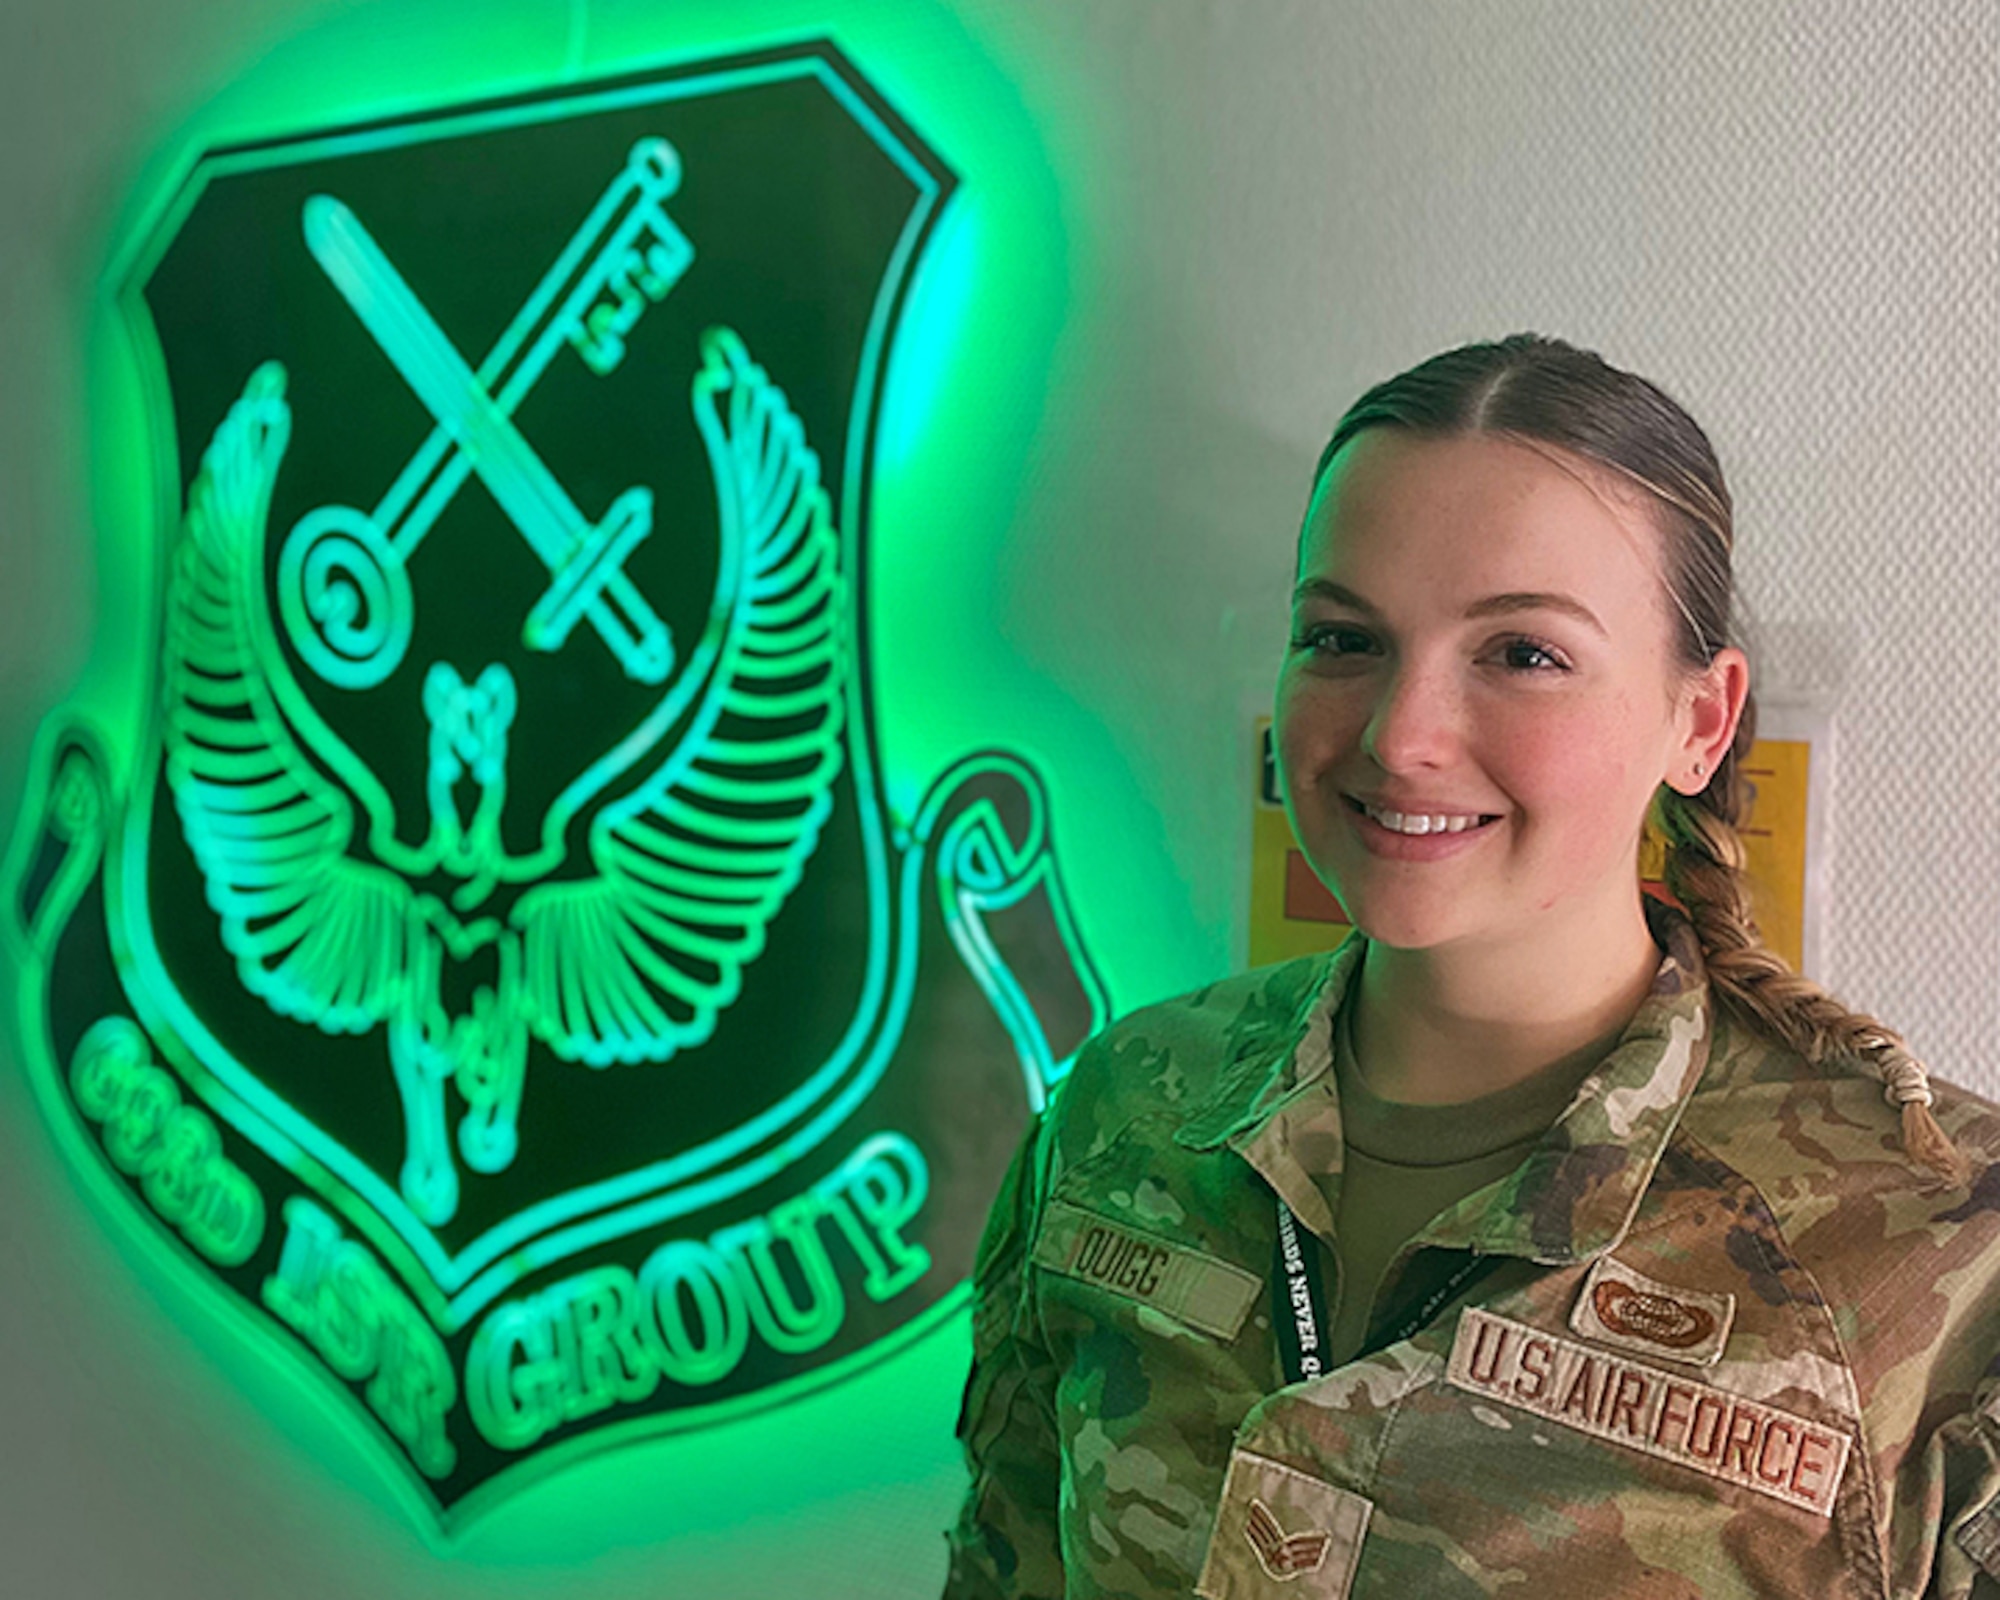 Maryland Air National Guard Senior Airman Elizabeth Quigg, a Cryptologic Analyst and Reporter assigned to the 135th Intelligence Squadron, poses for a photograph at Ramstein Air Base, Germany, Oct. 23, 2023.